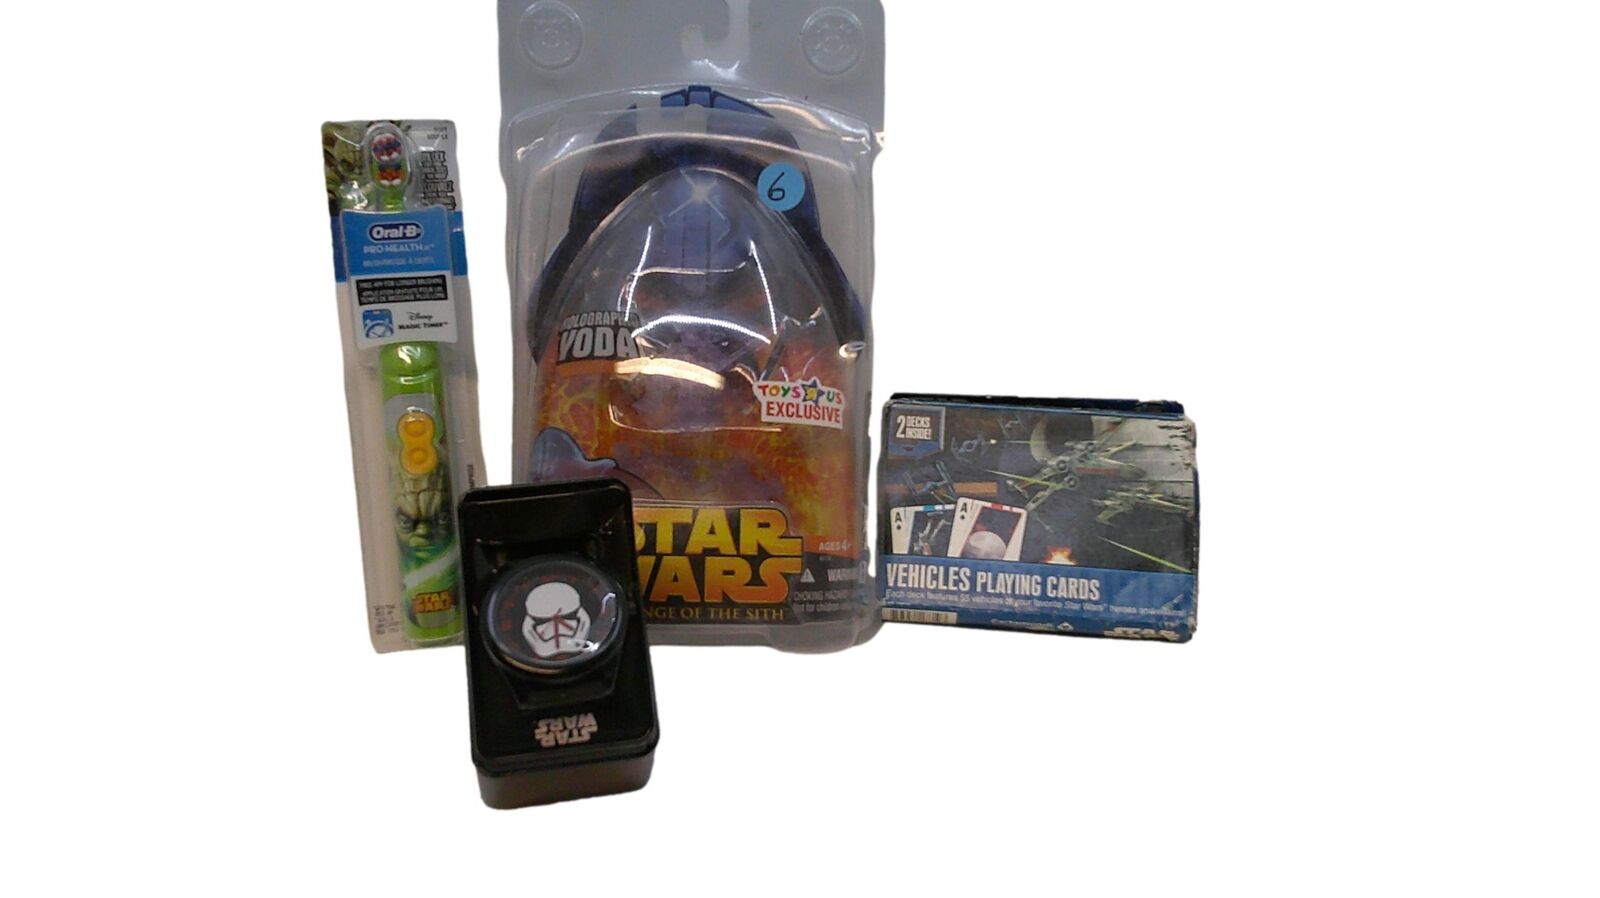 Assortment of Star Wars Items, toothbrush, Watch, Vehicle Playing Cards & Yoda